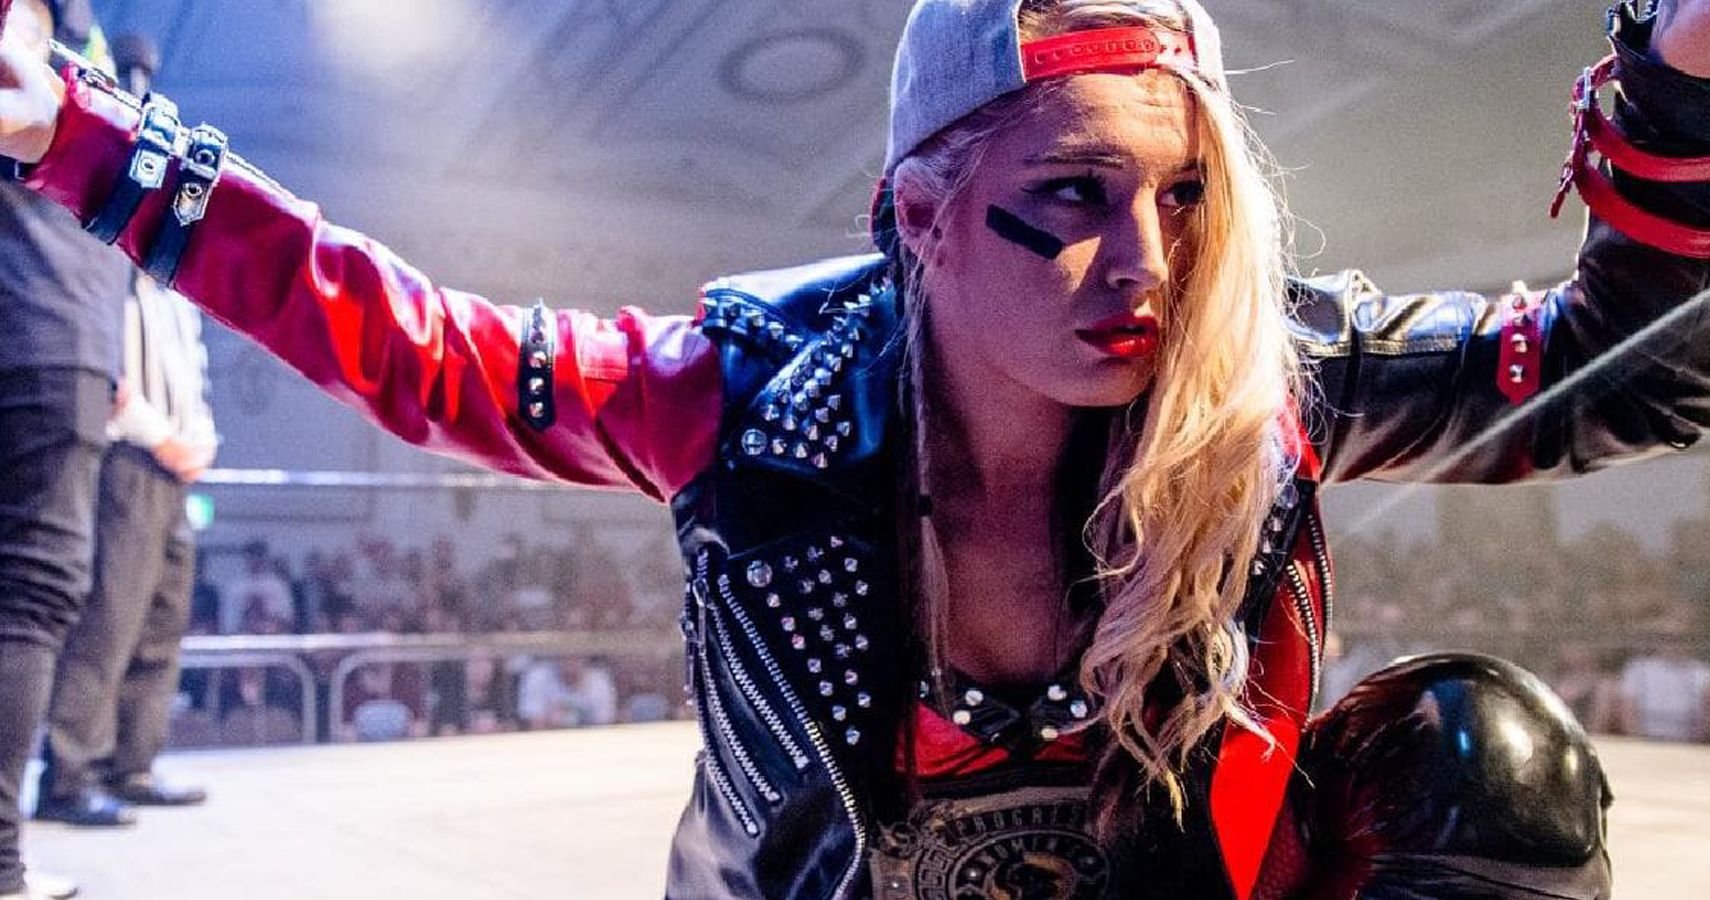 WWE Female Performer Toni Storm Hints She's Dating Top Wrestling Star